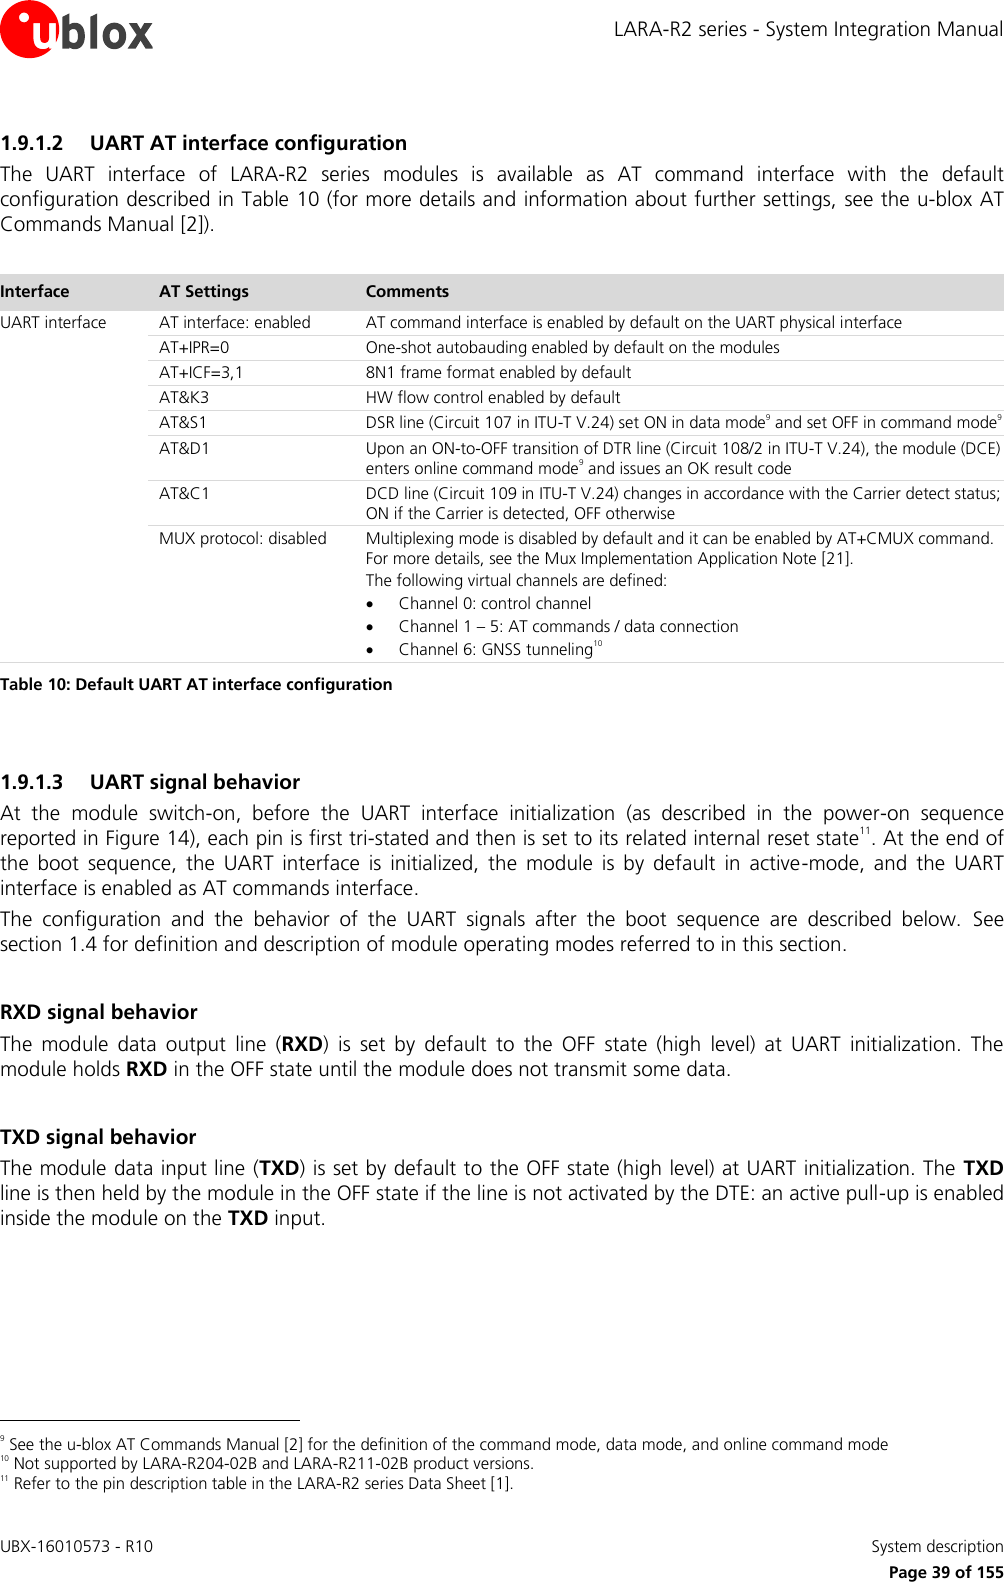 LARA-R2 series - System Integration Manual UBX-16010573 - R10    System description     Page 39 of 155 1.9.1.2 UART AT interface configuration The  UART  interface  of  LARA-R2  series  modules  is  available  as  AT  command  interface  with  the  default configuration described in Table 10 (for more details and information about further settings, see the u-blox AT Commands Manual [2]).  Interface AT Settings Comments UART interface AT interface: enabled AT command interface is enabled by default on the UART physical interface AT+IPR=0 One-shot autobauding enabled by default on the modules AT+ICF=3,1 8N1 frame format enabled by default AT&amp;K3 HW flow control enabled by default AT&amp;S1 DSR line (Circuit 107 in ITU-T V.24) set ON in data mode9 and set OFF in command mode9 AT&amp;D1 Upon an ON-to-OFF transition of DTR line (Circuit 108/2 in ITU-T V.24), the module (DCE) enters online command mode9 and issues an OK result code AT&amp;C1 DCD line (Circuit 109 in ITU-T V.24) changes in accordance with the Carrier detect status; ON if the Carrier is detected, OFF otherwise MUX protocol: disabled Multiplexing mode is disabled by default and it can be enabled by AT+CMUX command. For more details, see the Mux Implementation Application Note [21]. The following virtual channels are defined:  Channel 0: control channel  Channel 1 – 5: AT commands / data connection  Channel 6: GNSS tunneling10 Table 10: Default UART AT interface configuration  1.9.1.3 UART signal behavior At  the  module  switch-on,  before  the  UART  interface  initialization  (as  described  in  the  power-on  sequence reported in Figure 14), each pin is first tri-stated and then is set to its related internal reset state11. At the end of the  boot  sequence,  the  UART  interface  is  initialized,  the  module  is  by  default  in  active-mode,  and  the  UART interface is enabled as AT commands interface. The  configuration  and  the  behavior  of  the  UART  signals  after  the  boot  sequence  are  described  below.  See section 1.4 for definition and description of module operating modes referred to in this section.  RXD signal behavior The  module  data  output  line  (RXD)  is  set  by  default  to  the  OFF  state  (high  level)  at  UART  initialization.  The module holds RXD in the OFF state until the module does not transmit some data.  TXD signal behavior The module data input line (TXD) is set by default to the OFF state (high level) at UART initialization. The TXD line is then held by the module in the OFF state if the line is not activated by the DTE: an active pull-up is enabled inside the module on the TXD input.                                                        9 See the u-blox AT Commands Manual [2] for the definition of the command mode, data mode, and online command mode 10 Not supported by LARA-R204-02B and LARA-R211-02B product versions. 11 Refer to the pin description table in the LARA-R2 series Data Sheet [1]. 